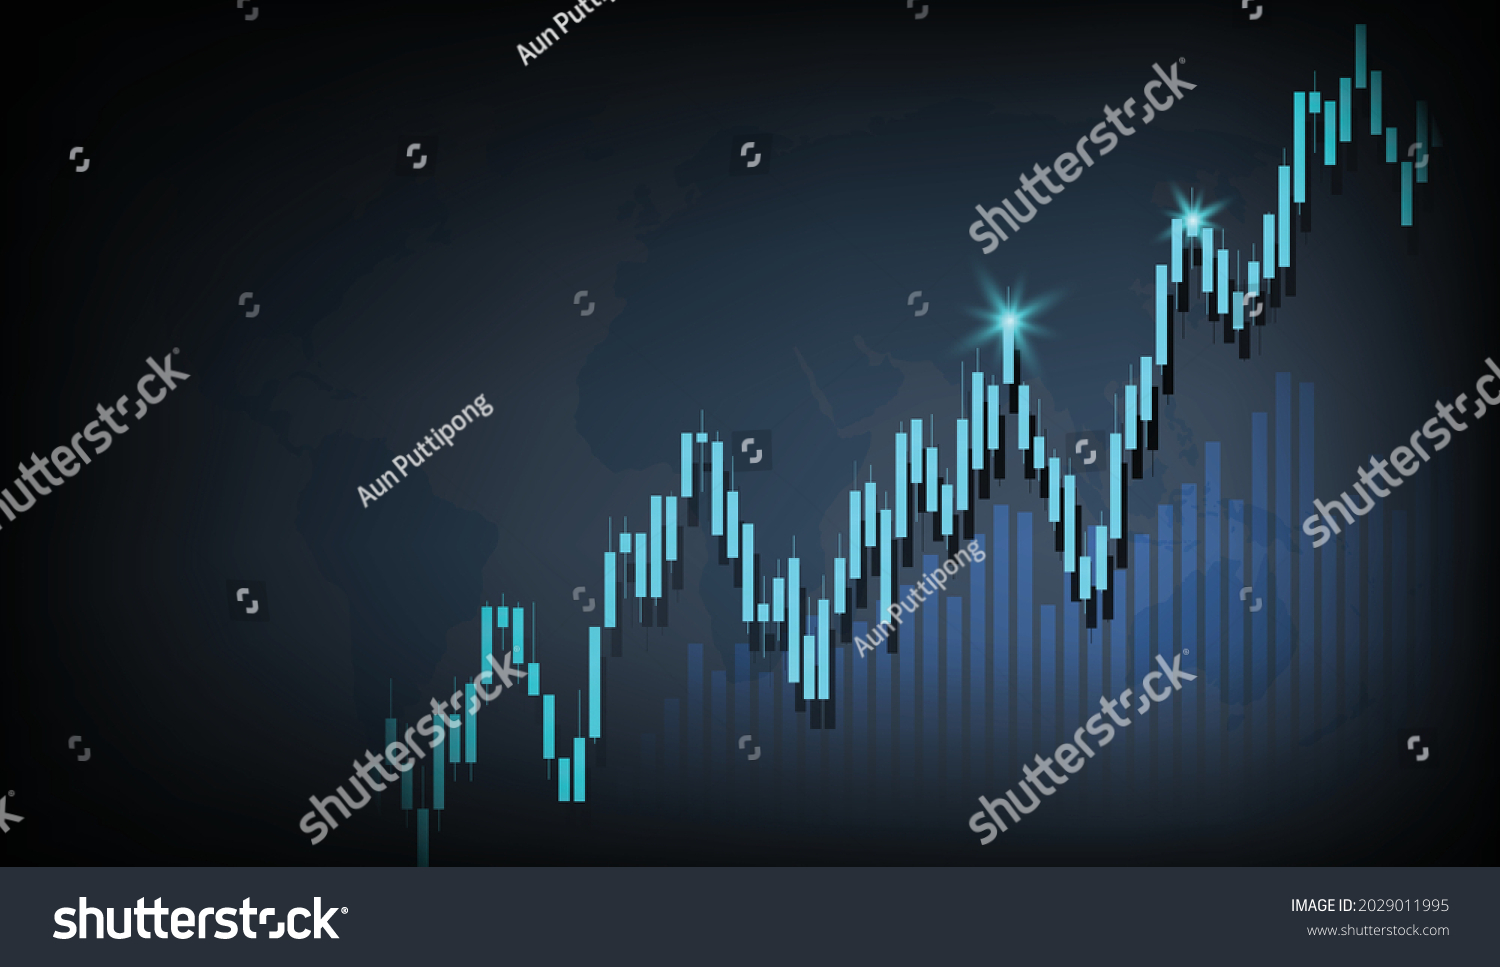 SVG of Blue neon candlestick and chart world stock market investment chart stock trading bullish point bear market trend trend graph vector with world map black background svg